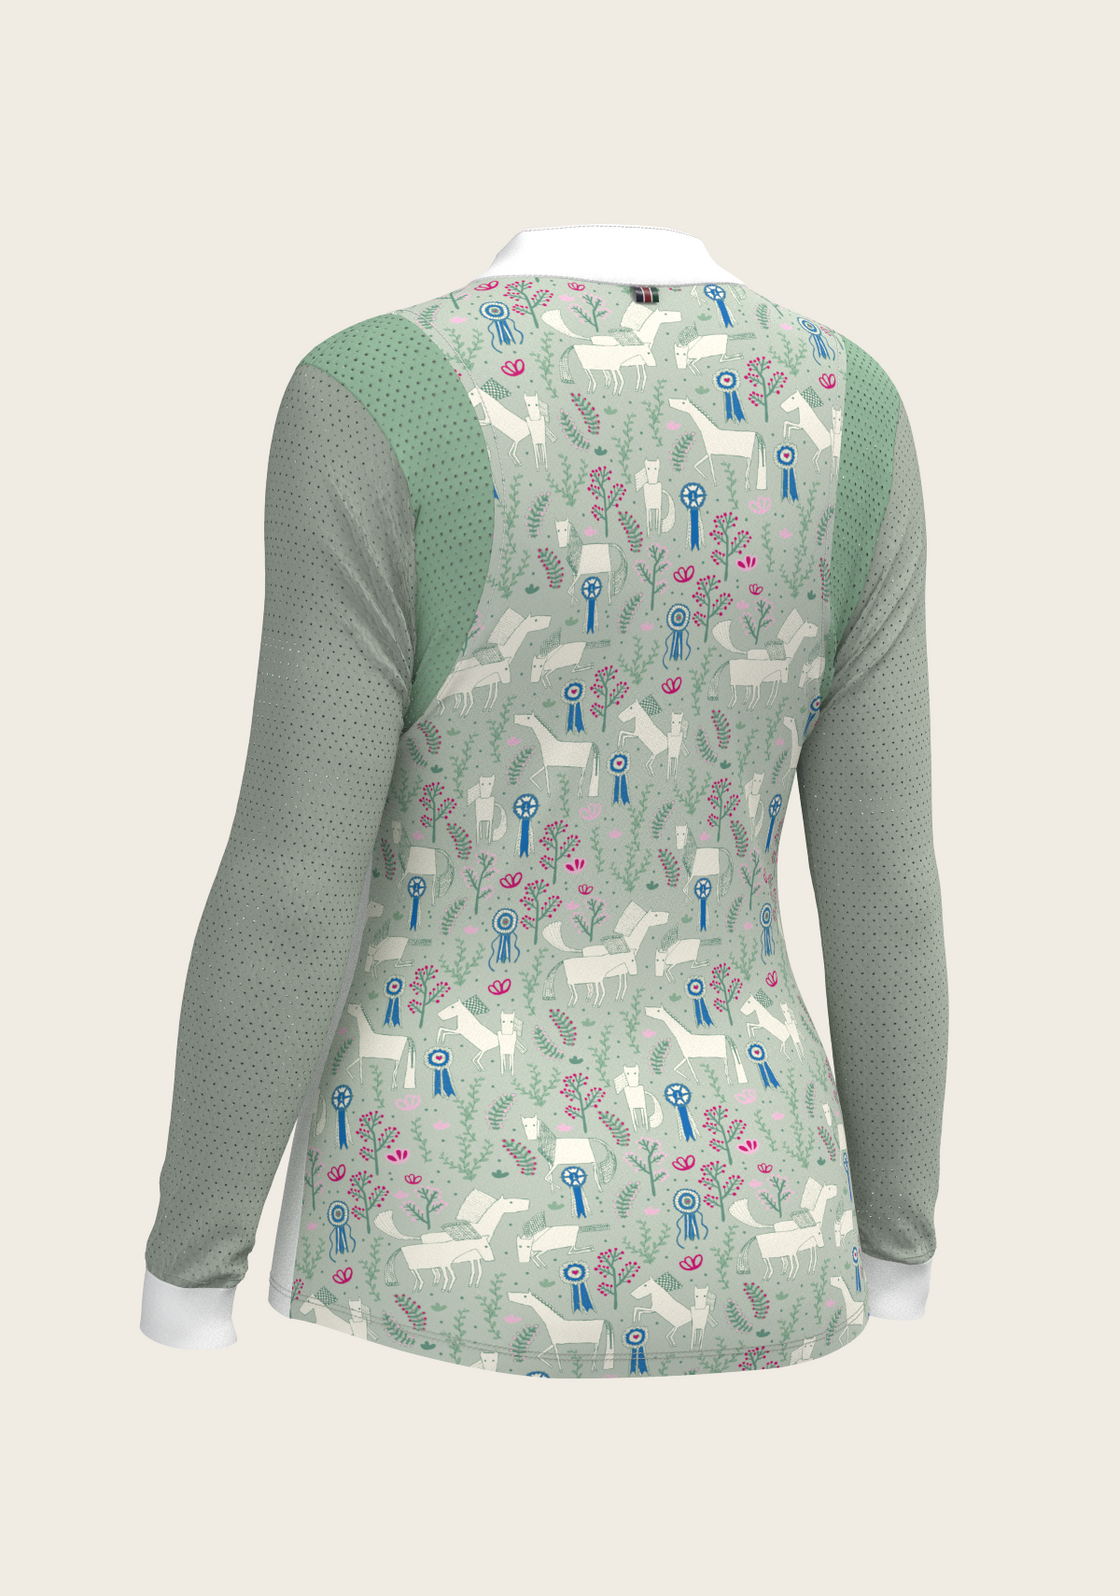  White with Rosettes in Lime Green Long Sleeve Sport Show Shirt